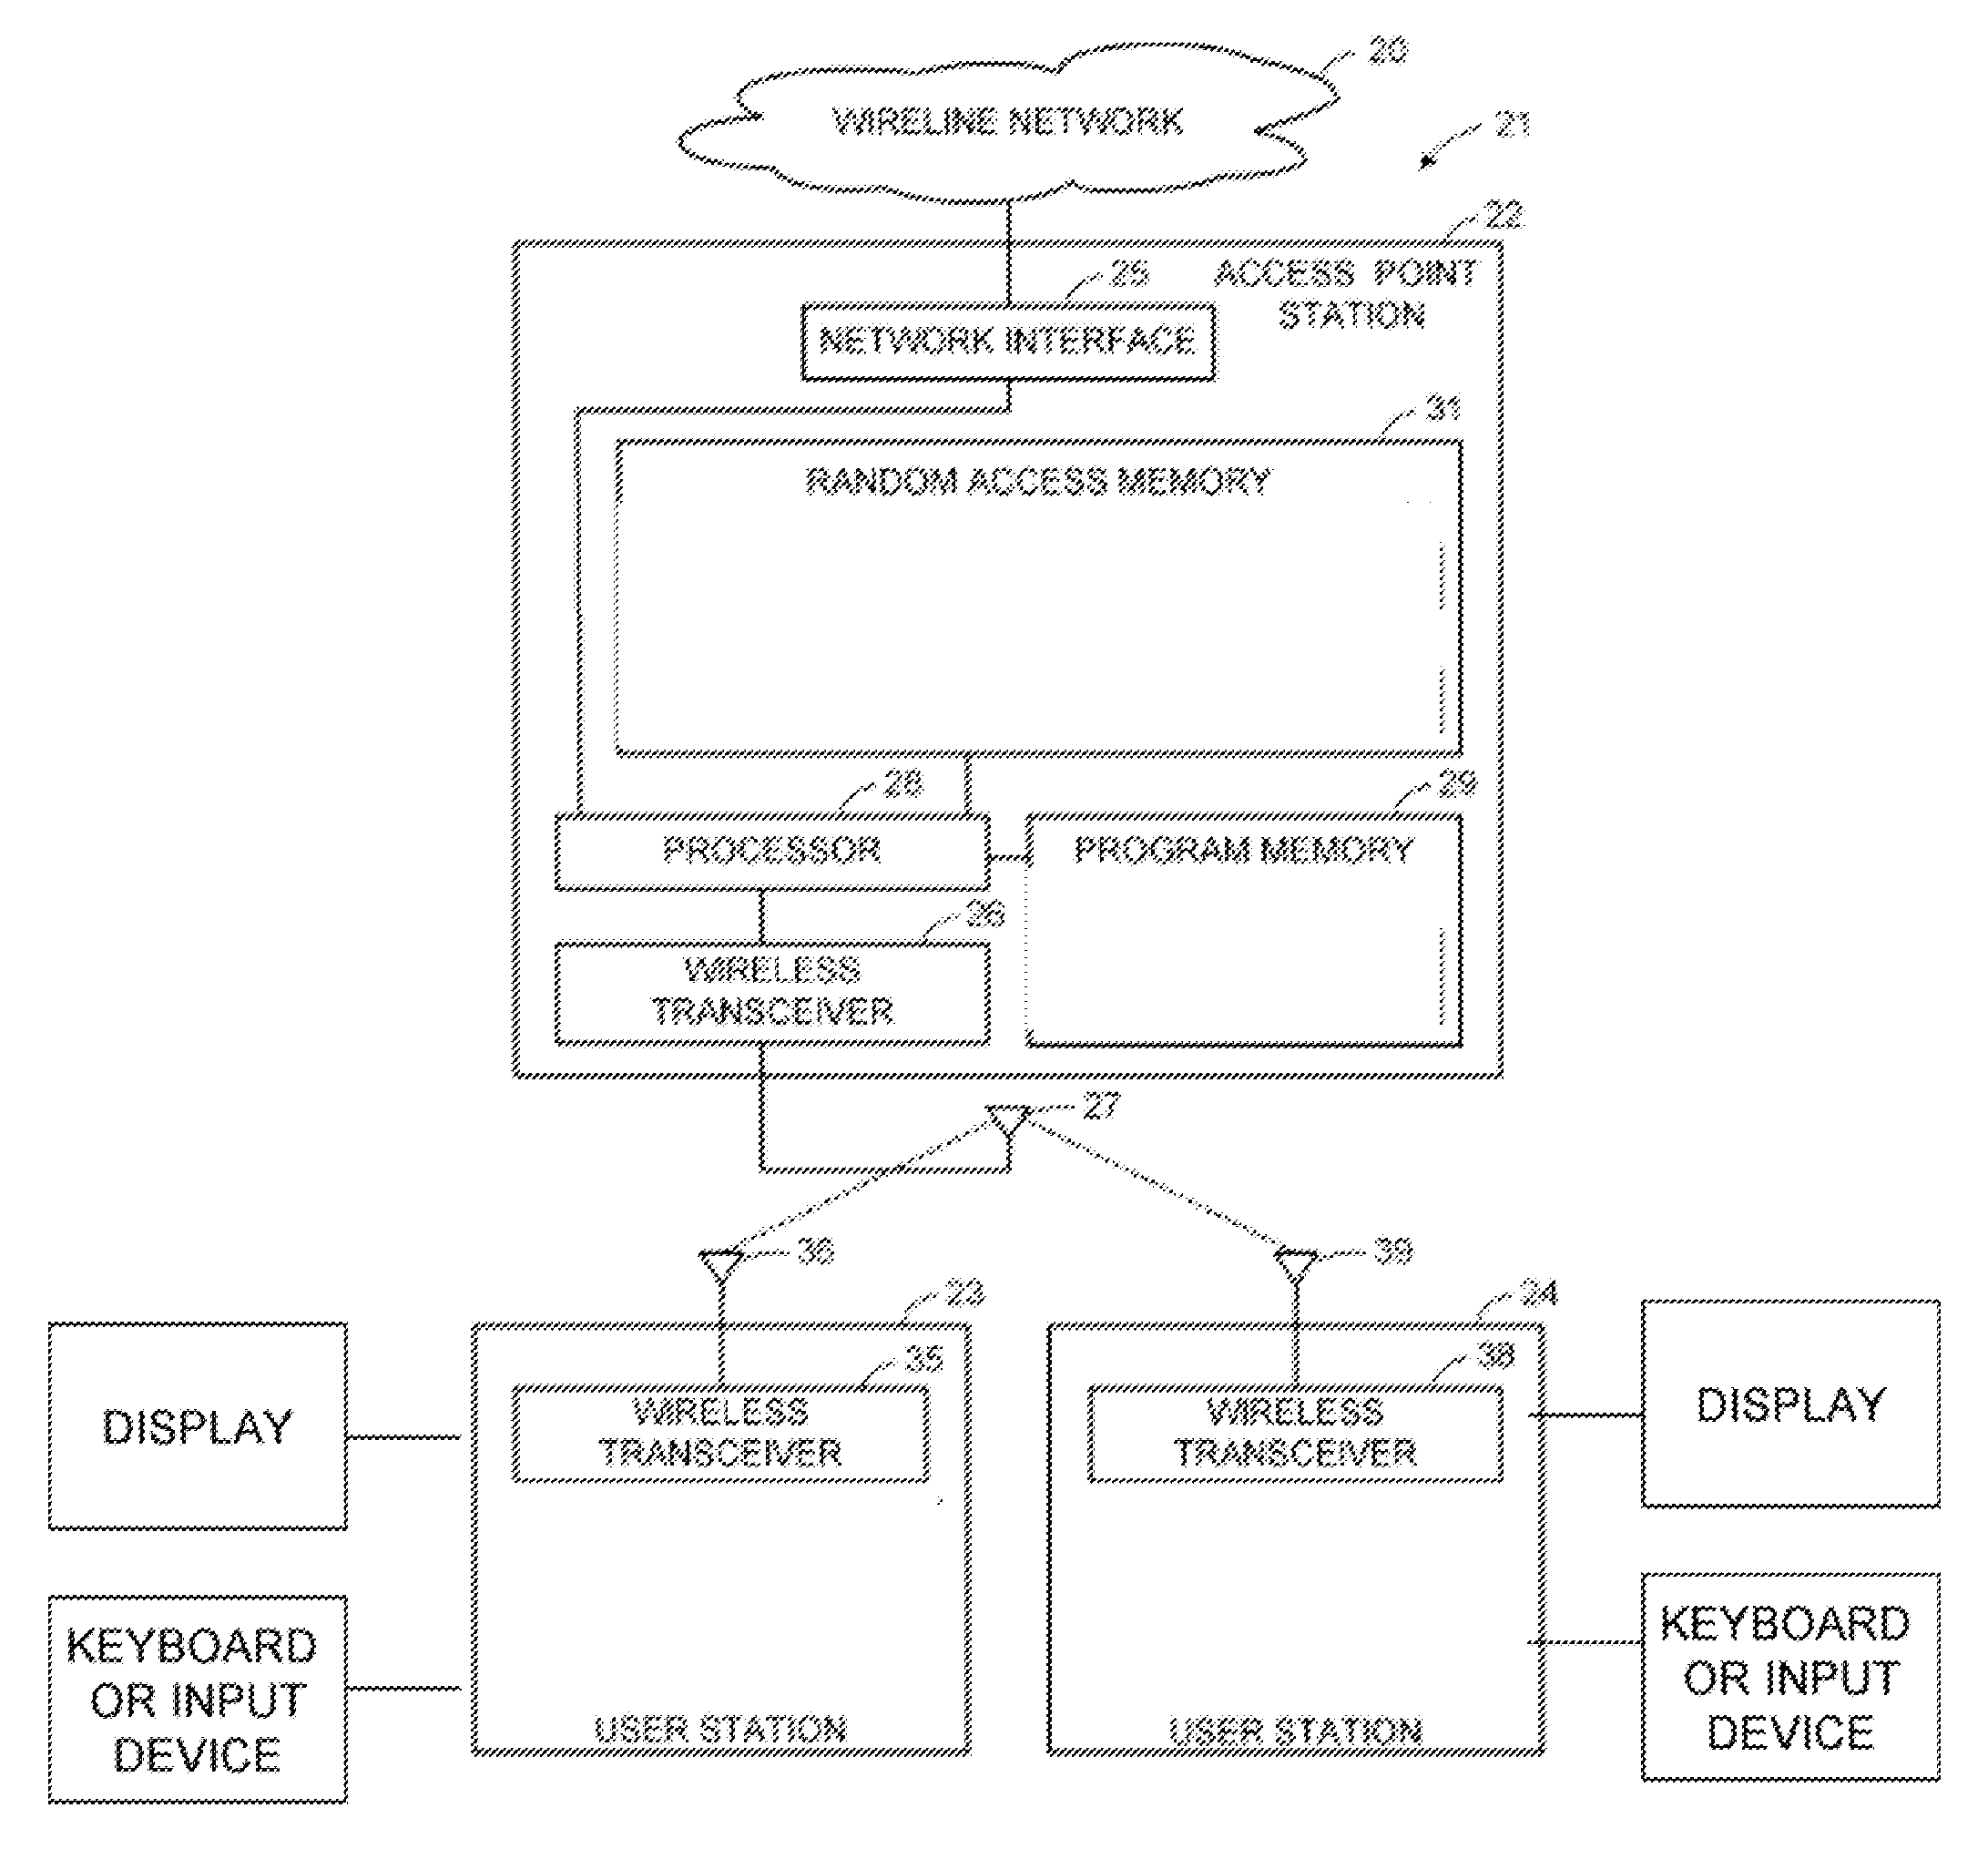 Distribution of Session Keys to the Selected Multiple Access Points Based on Geo-Location of APs